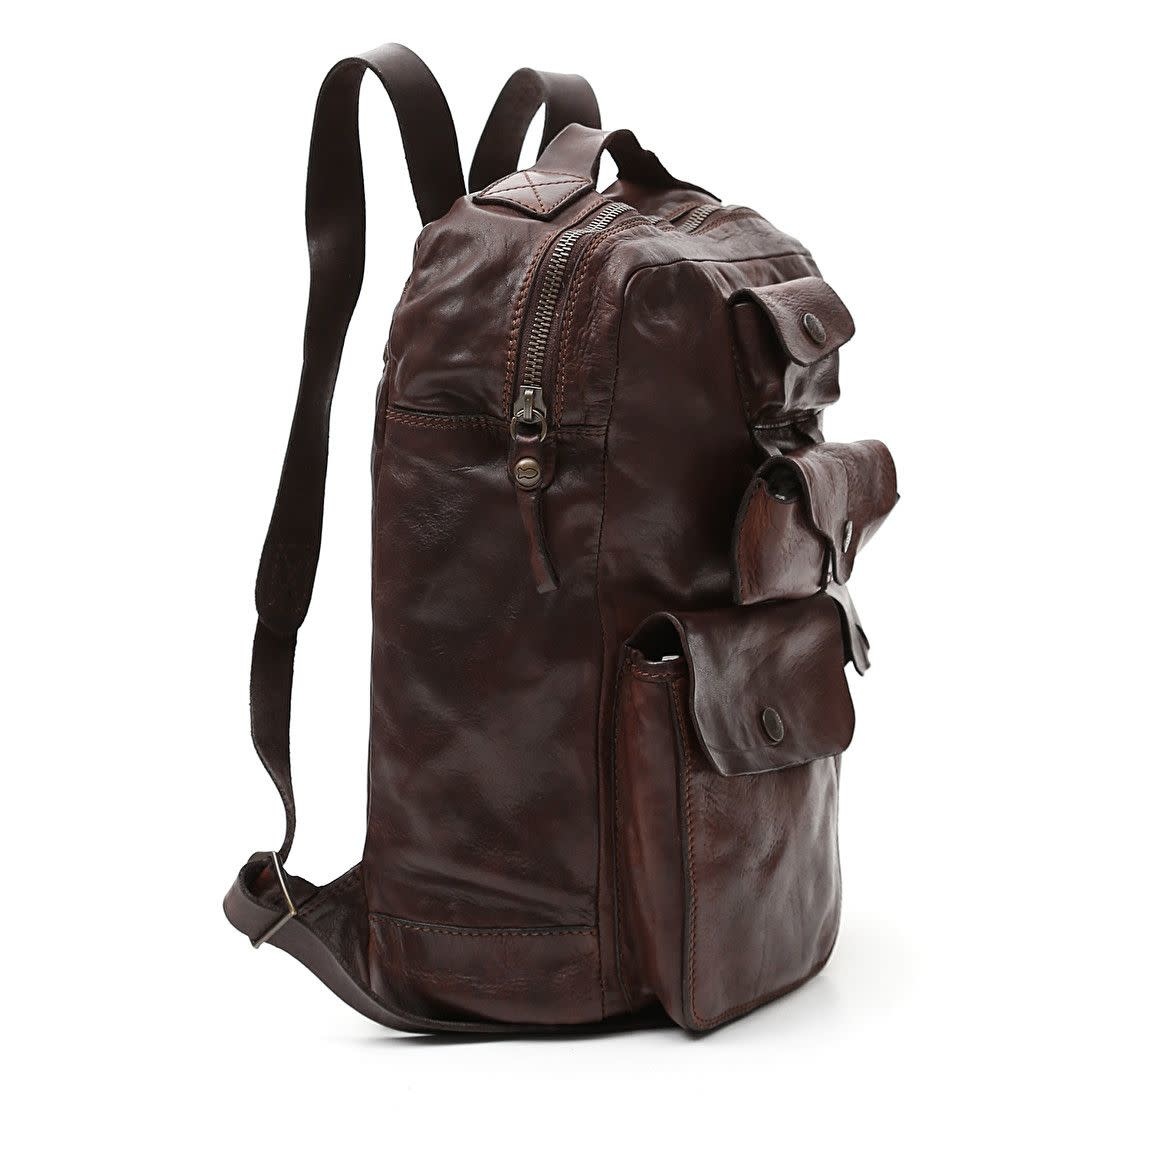 Campomaggi Backpack. Leather. Multipocket. P/D Moro.